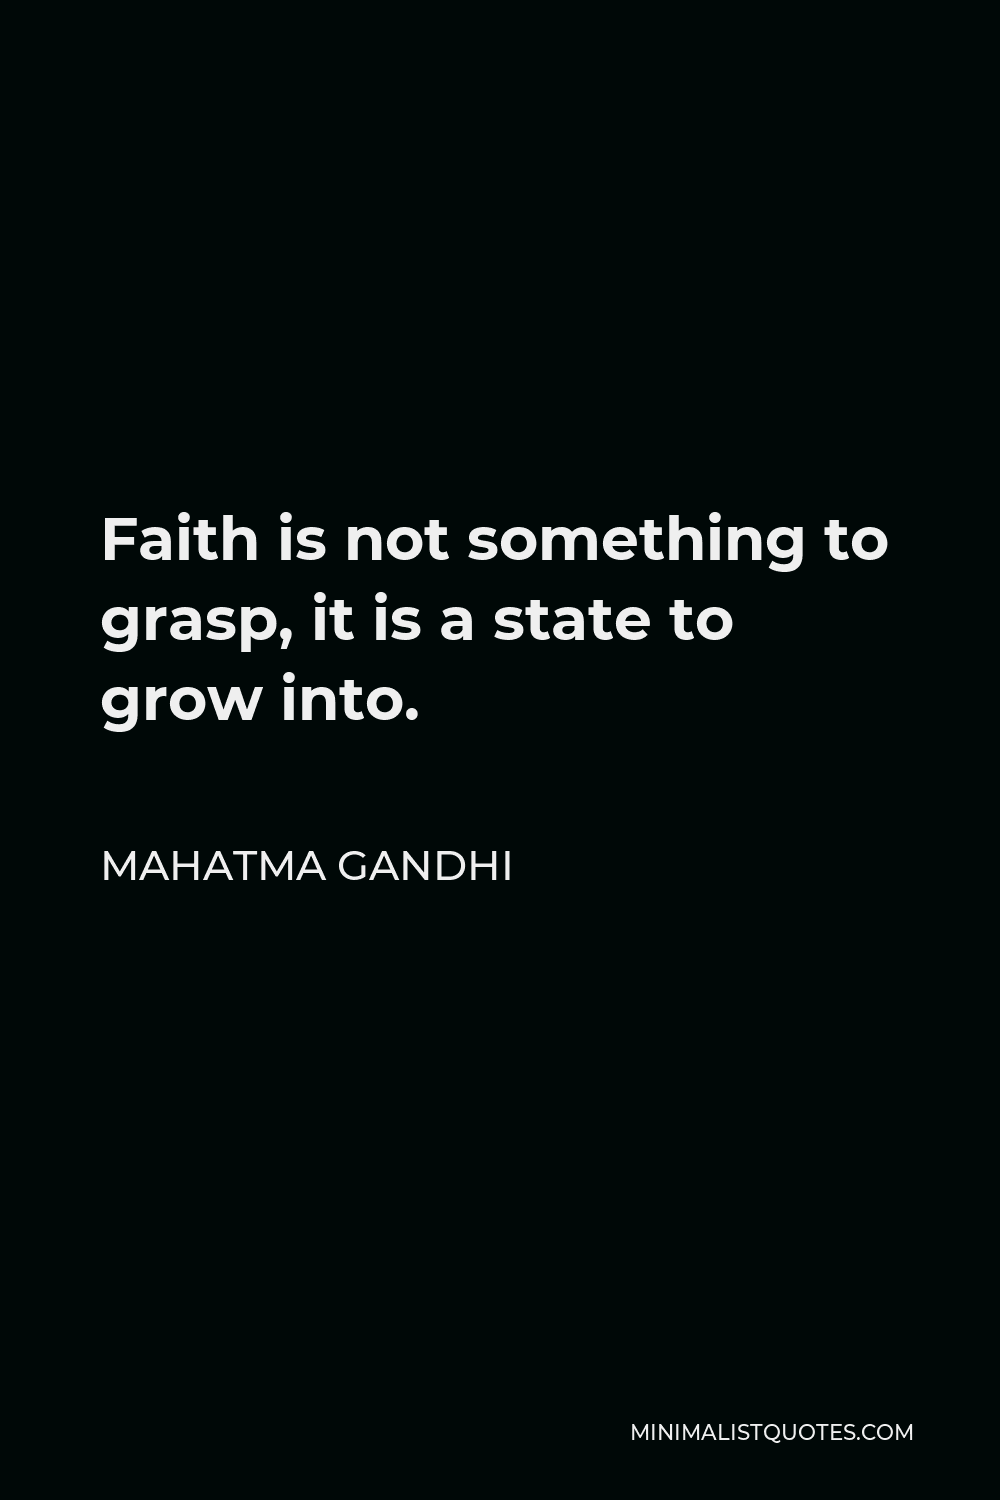 Mahatma Gandhi Quote - Faith is not something to grasp, it is a state to grow into.